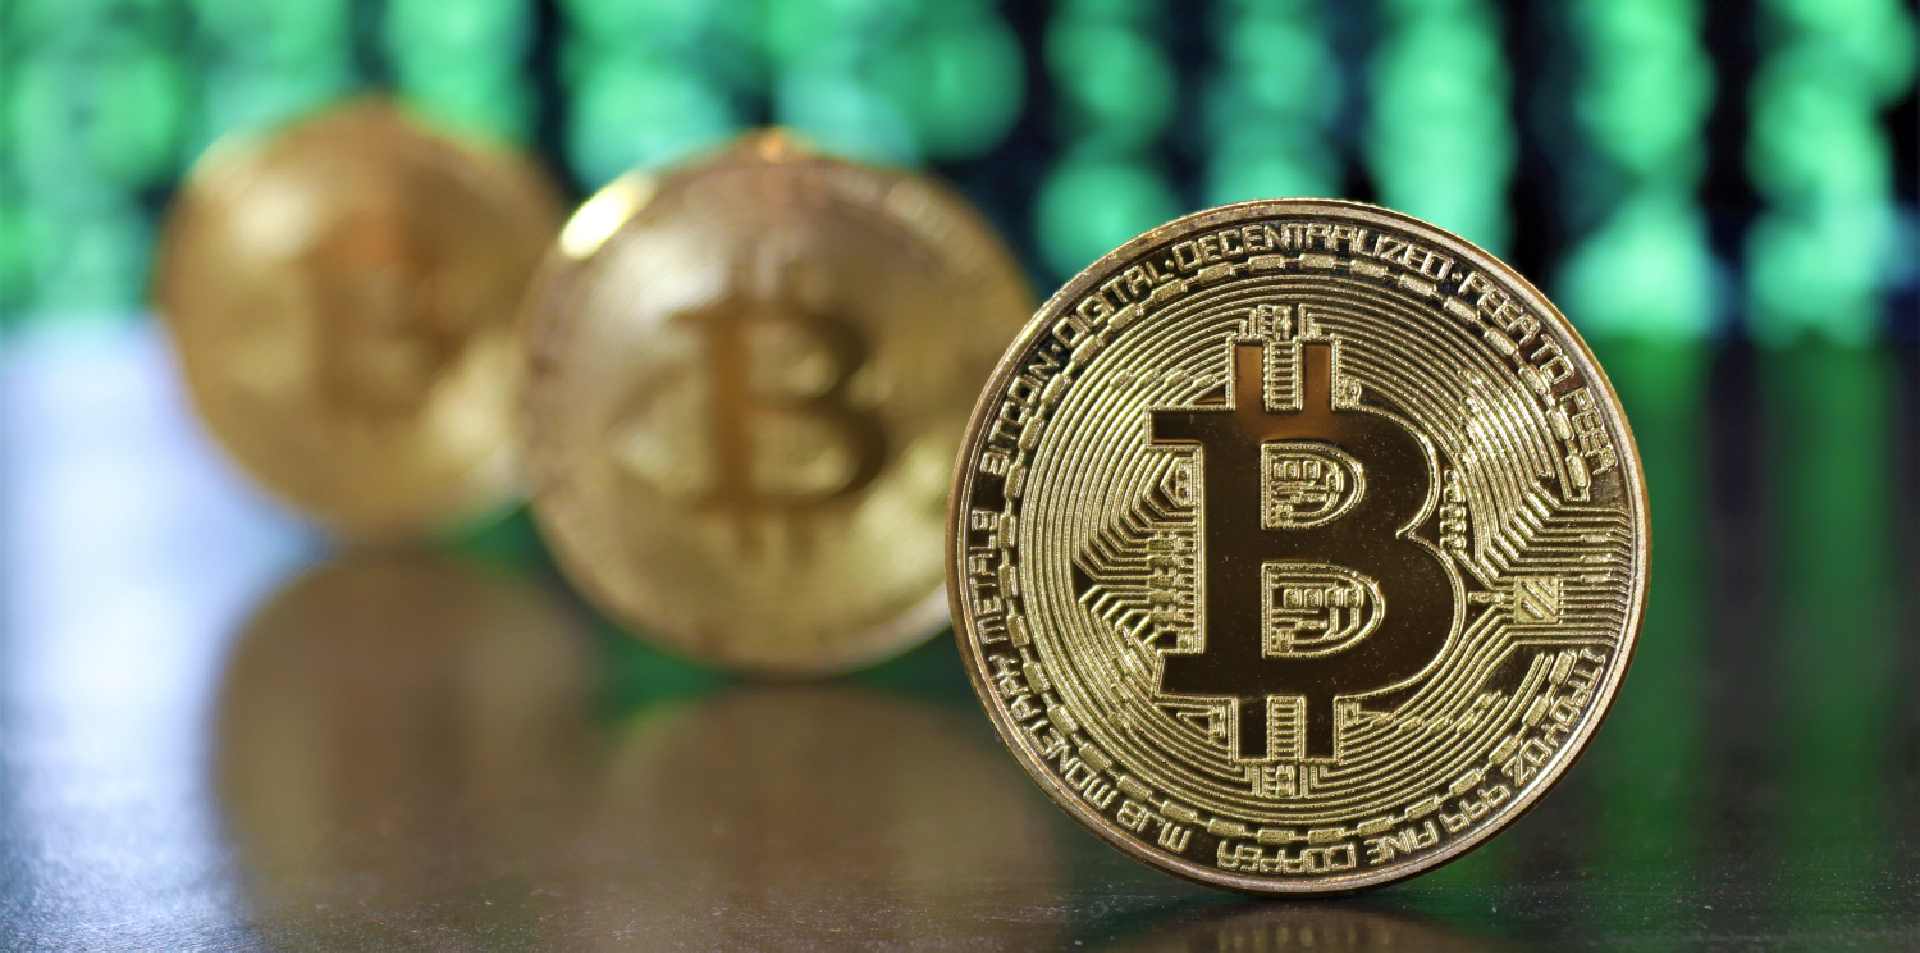 3 things every Bitcoin trader should watch in 2021